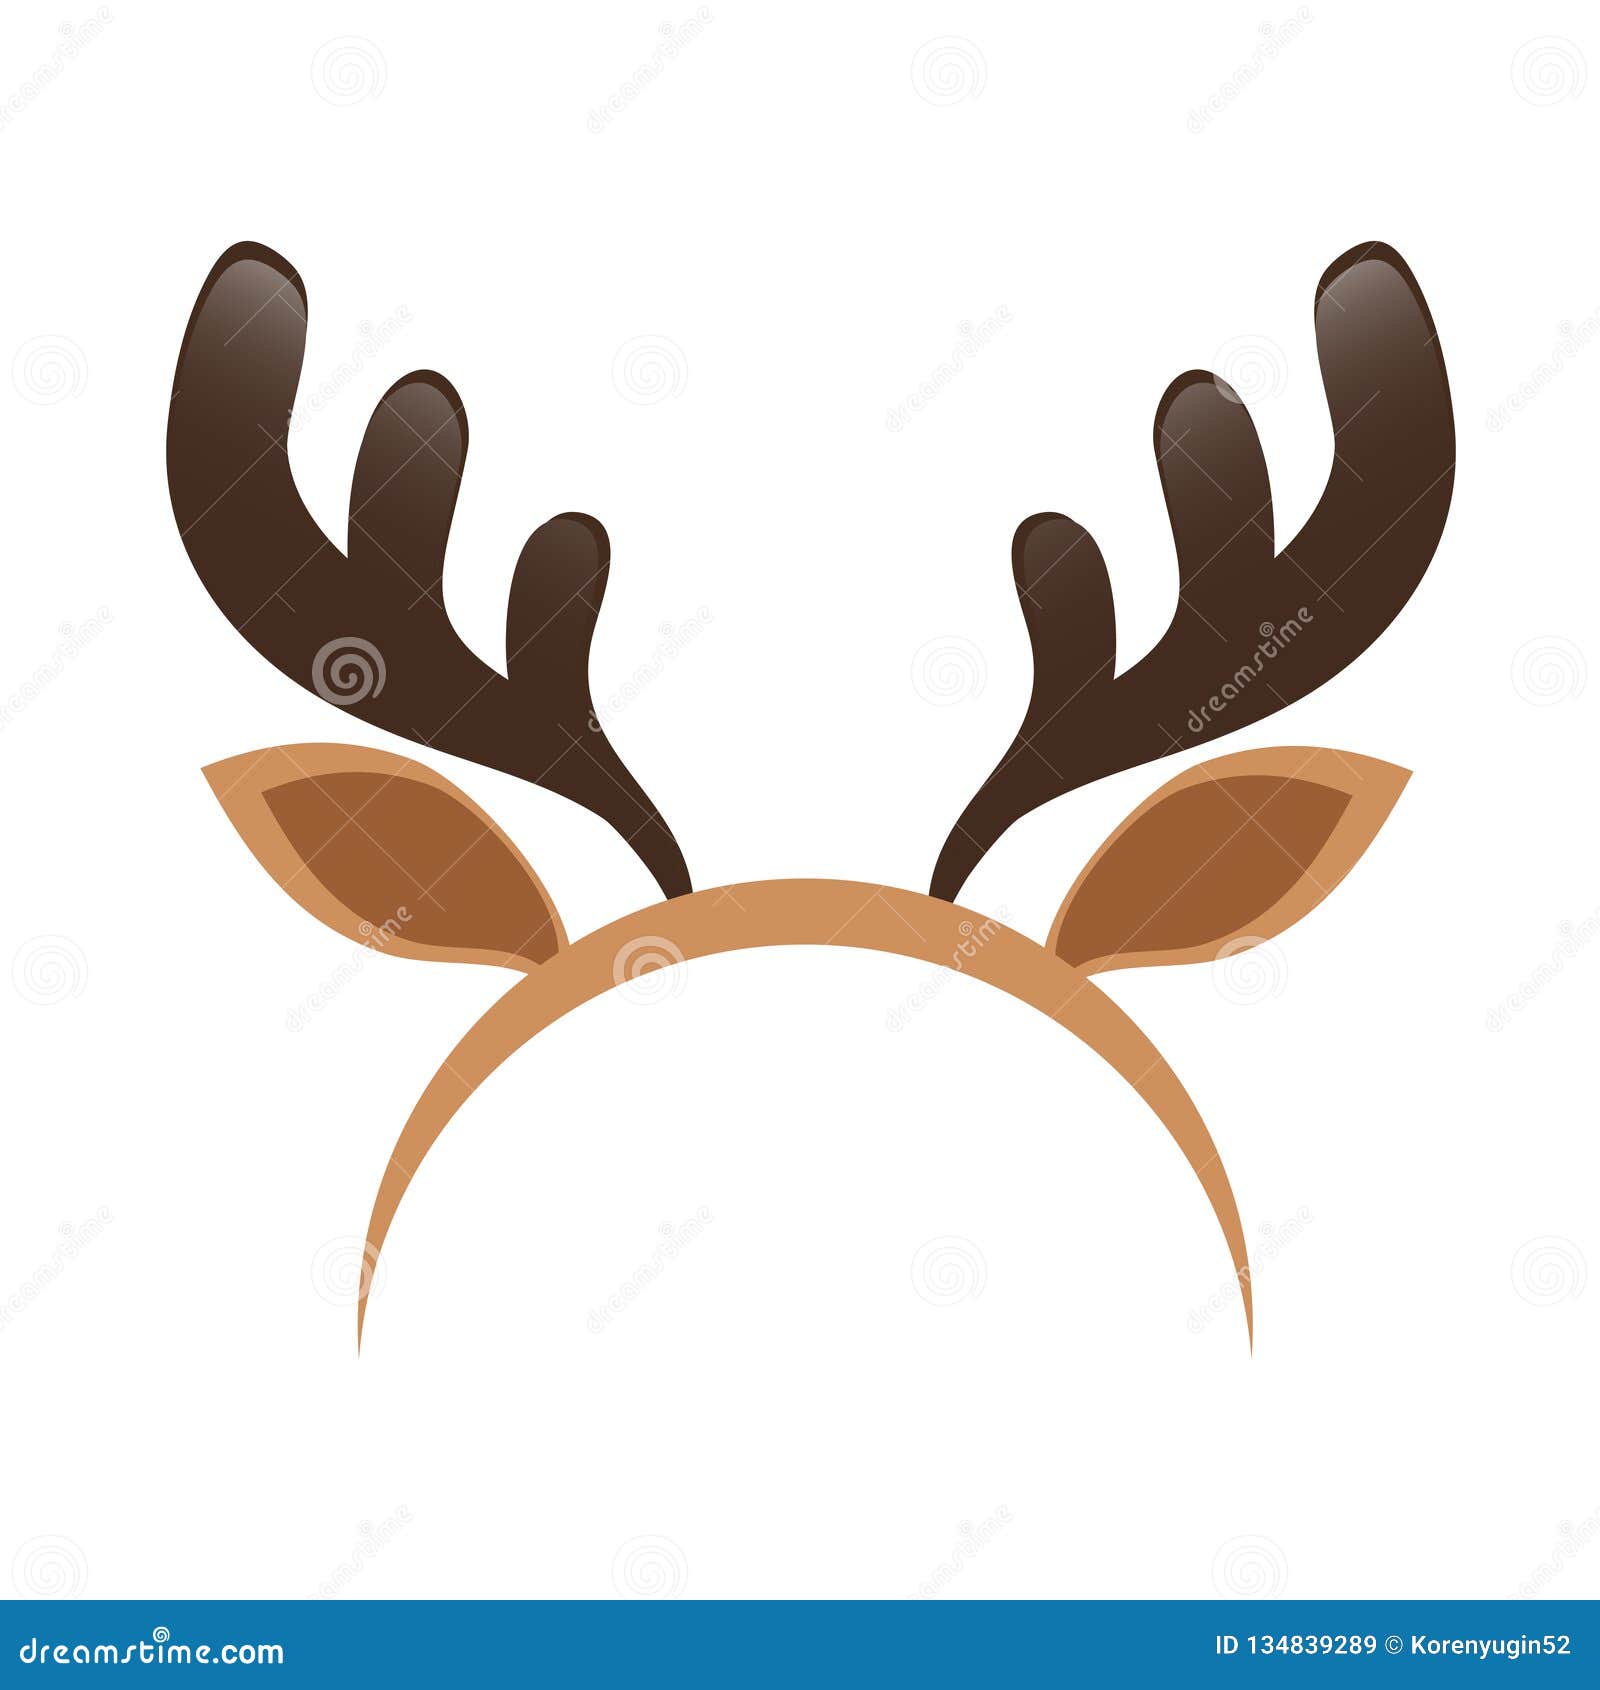 mask with reindeer antler  on white background. merry christmas.  